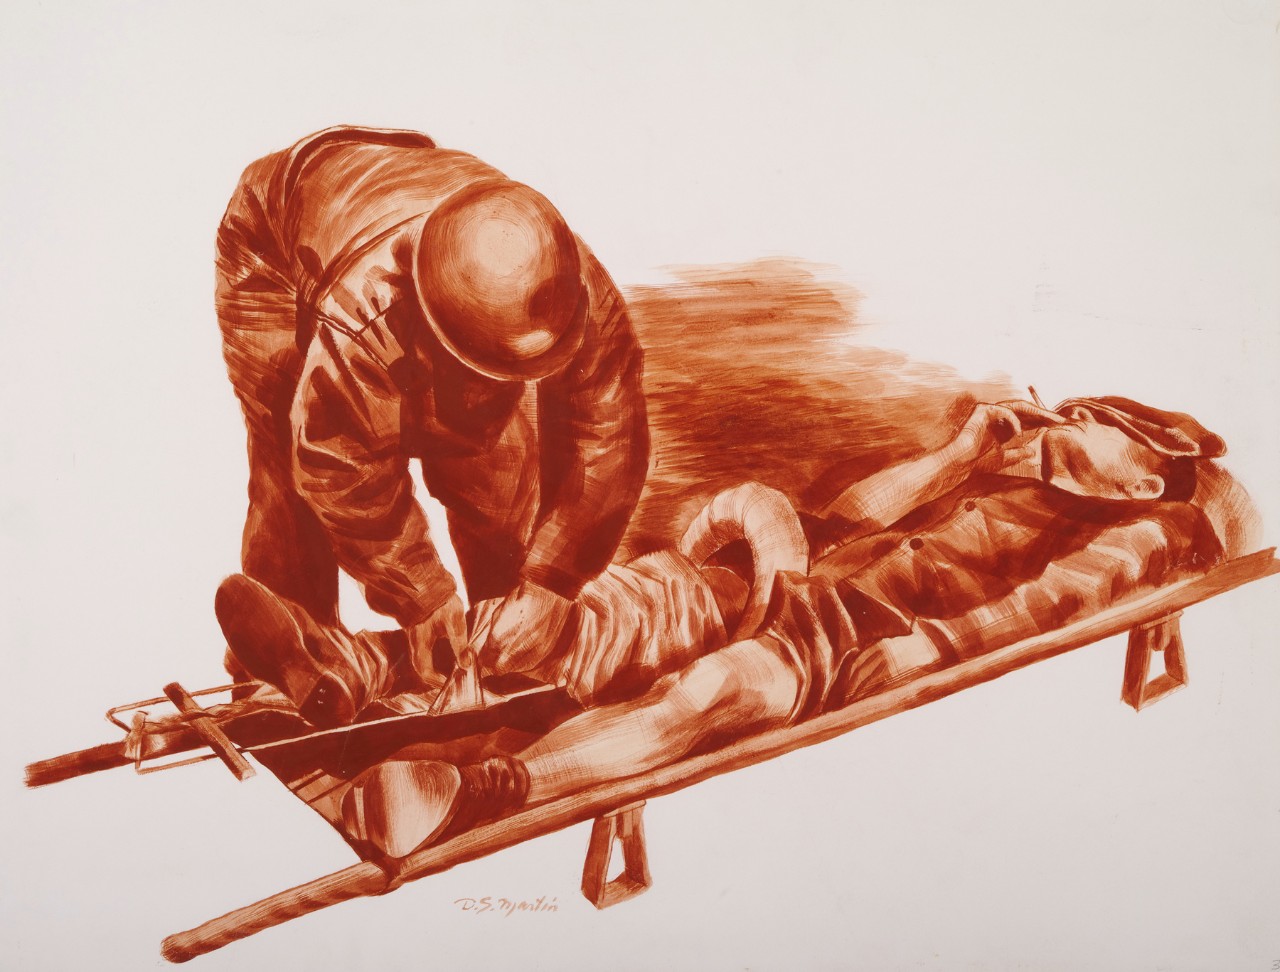 A Navy corpsman tends to a man on a stretcher